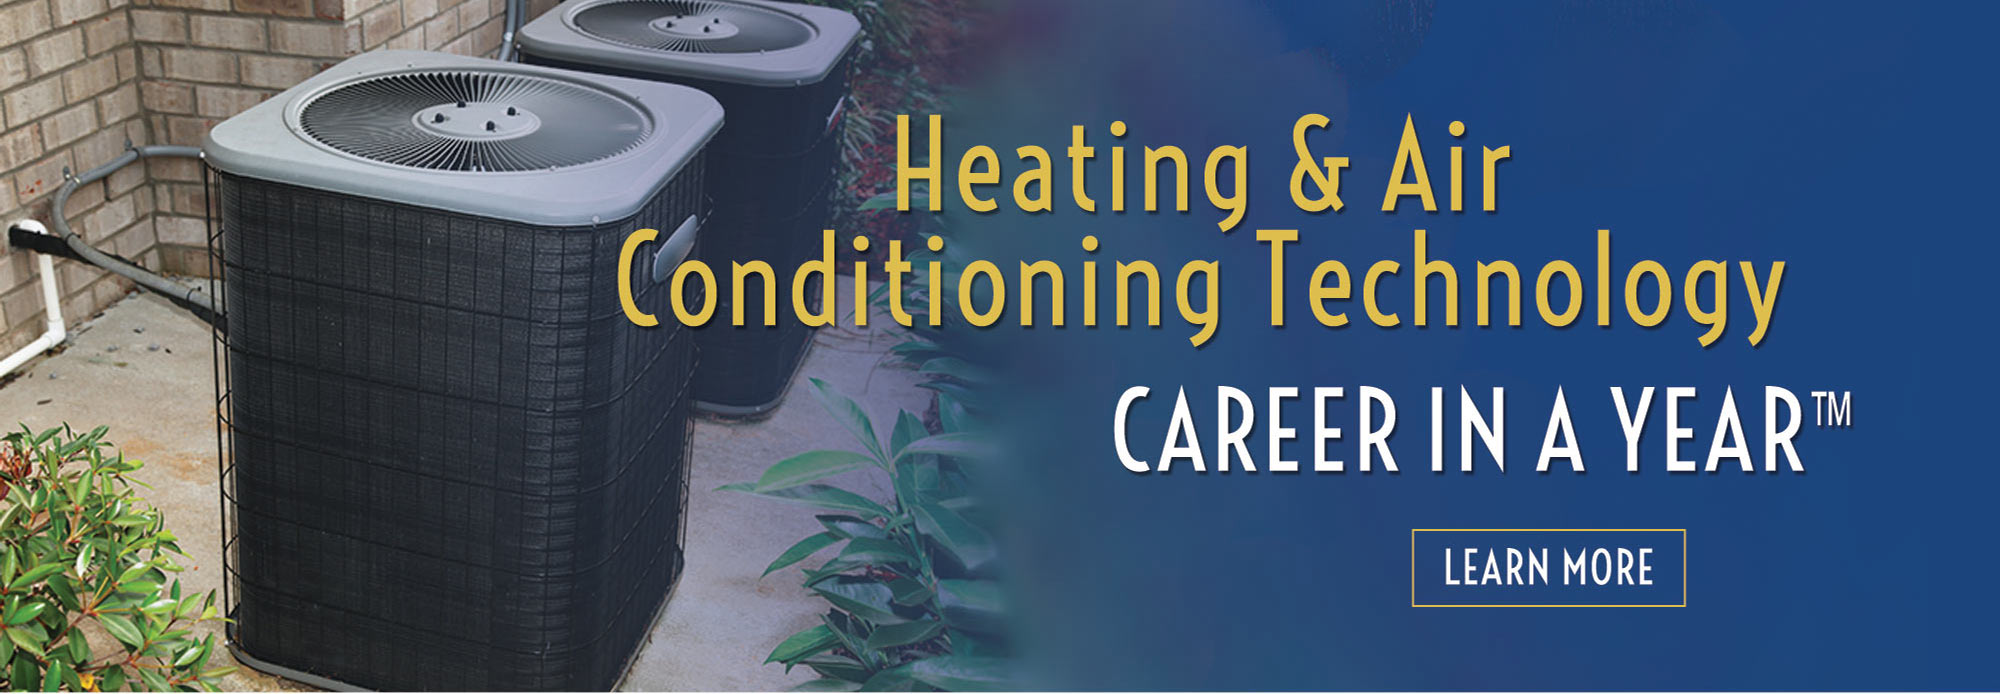 Heating and Air Conditioning Technology Career in a Year